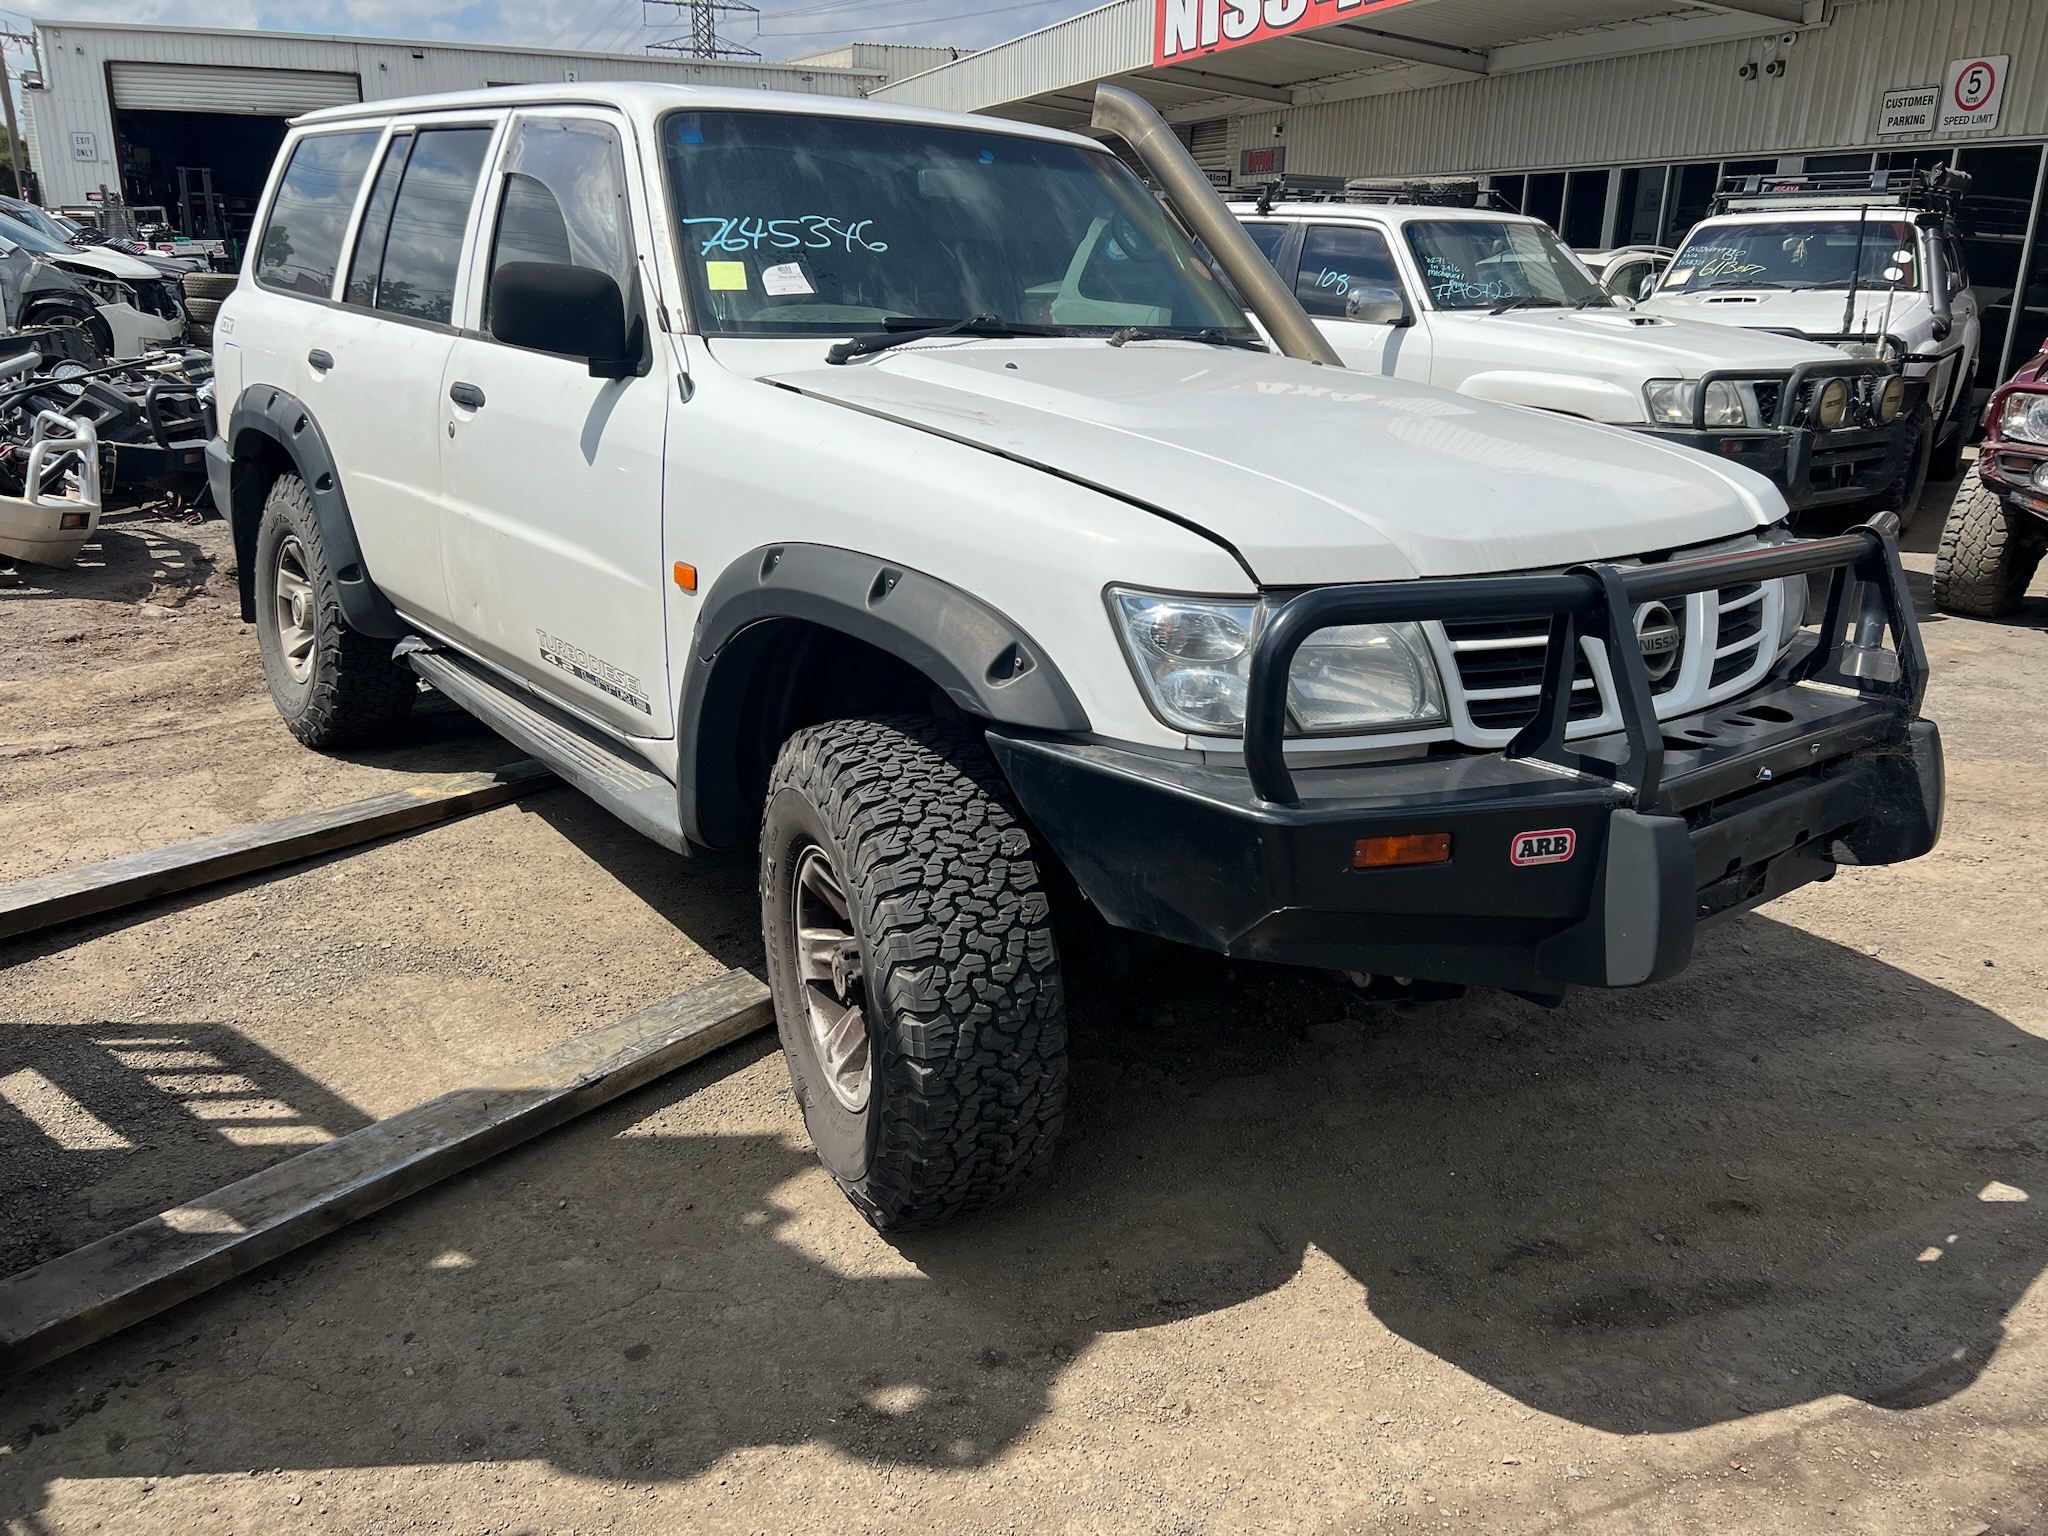 PARTING OUT NISSAN PATROL Y61 GU DX WAGON TD42 TURBO DIESEL WHITE WRECKING / PARTS FOR SALE